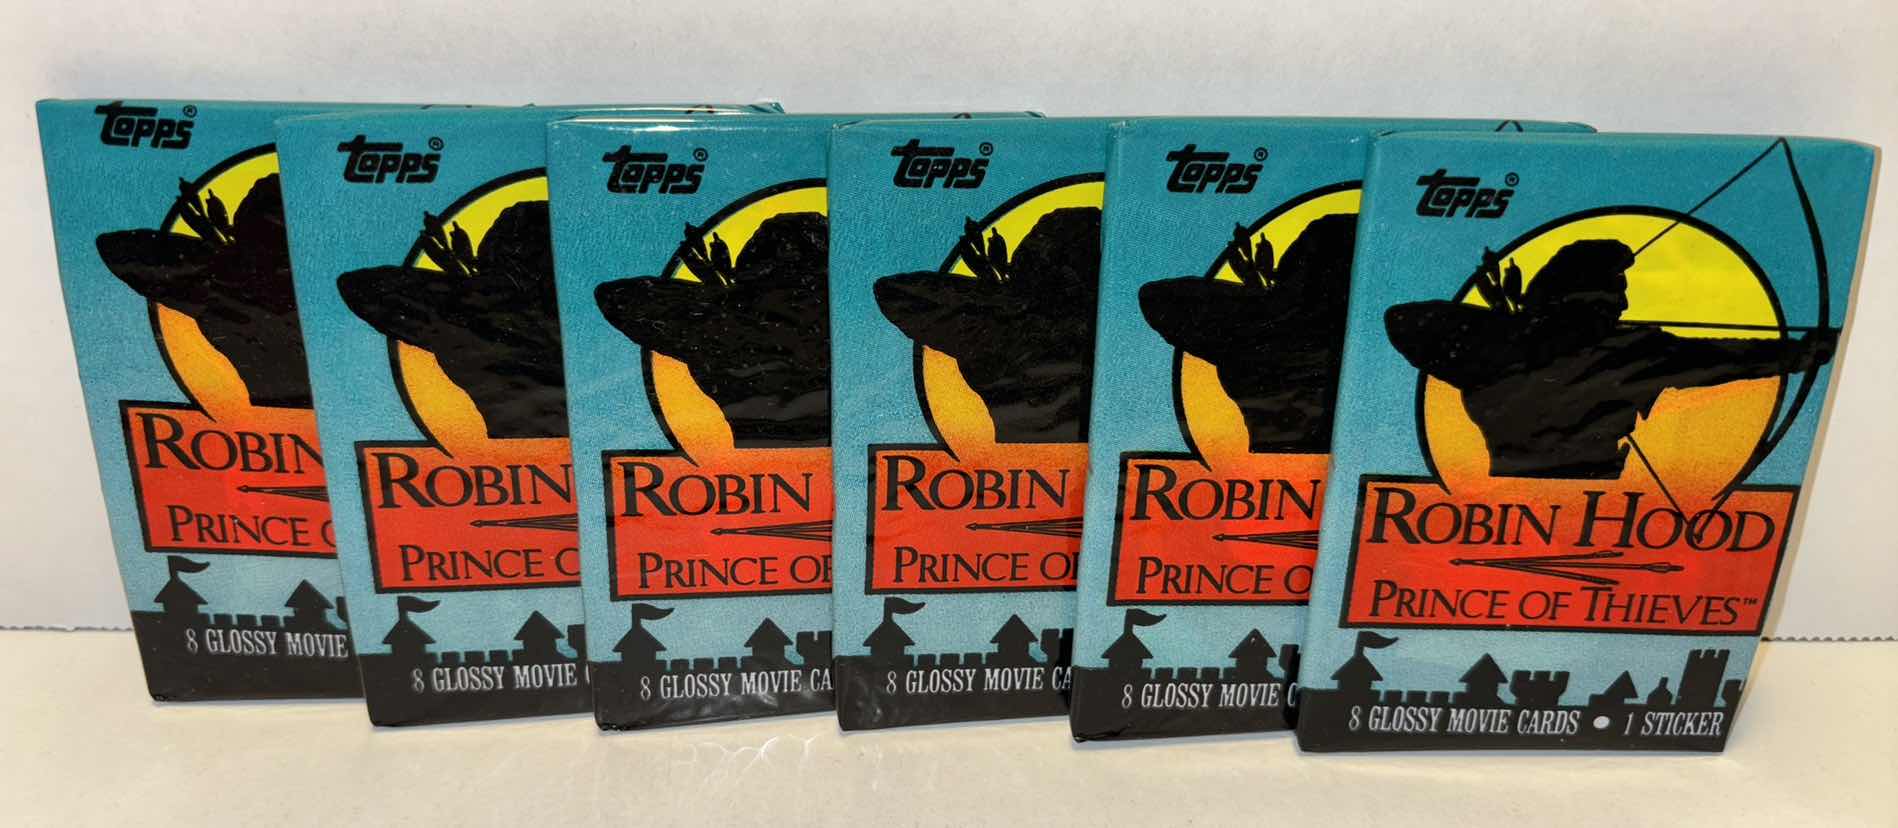 Photo 1 of NEW 6-PACK VINTAGE TOPPS 1991 COLLECTIBLE TRADING CARDS, 8 CT GLOSSY MOVIE CARDS W STICKER, “ROBIN HOOD: PRINCE OF THIEVES”